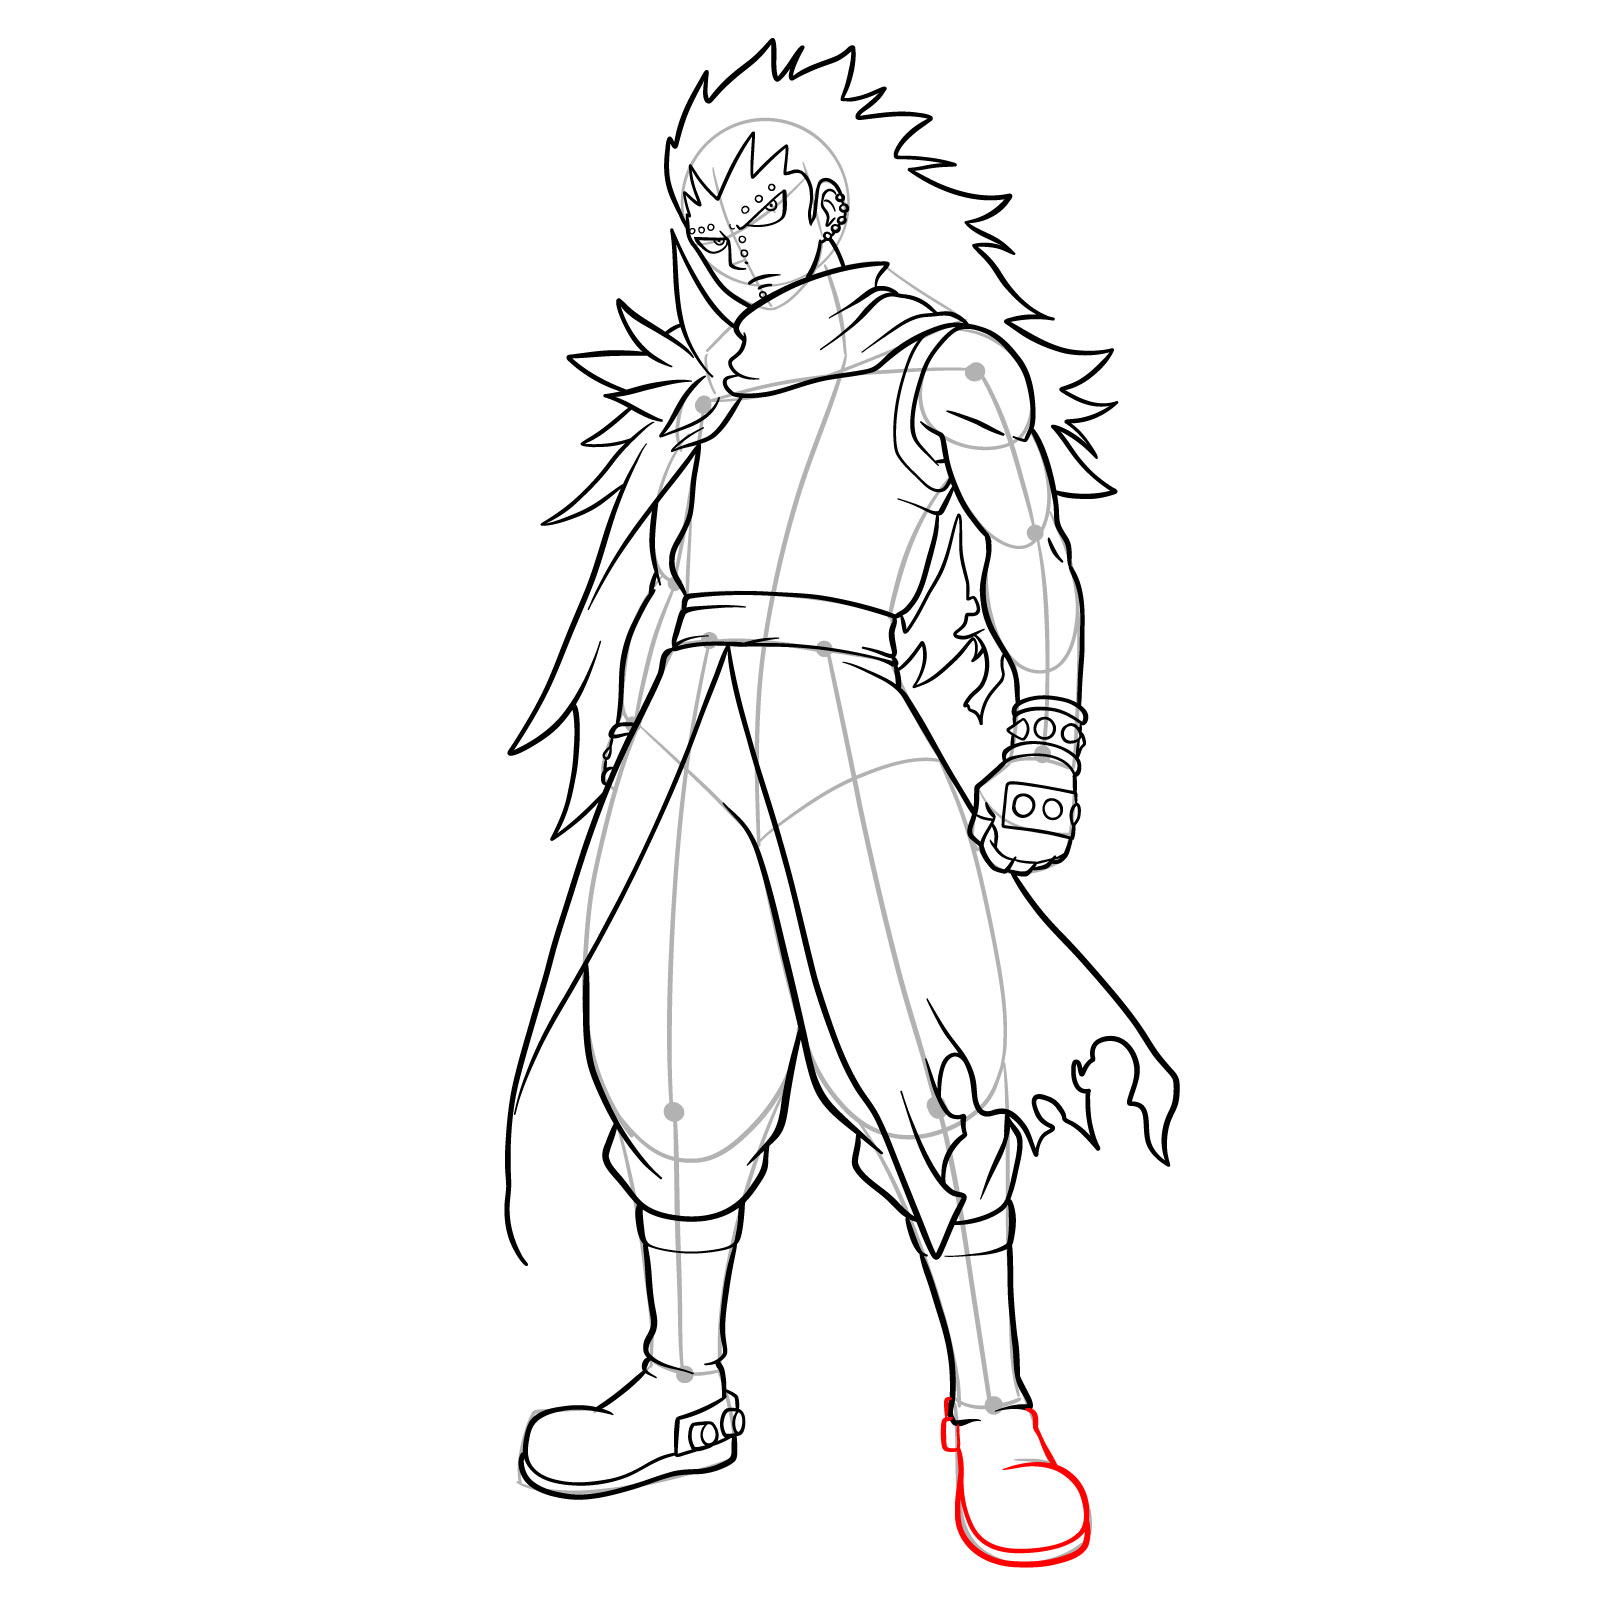 How to draw Gajeel Redfox from Fairy Tail - step 36